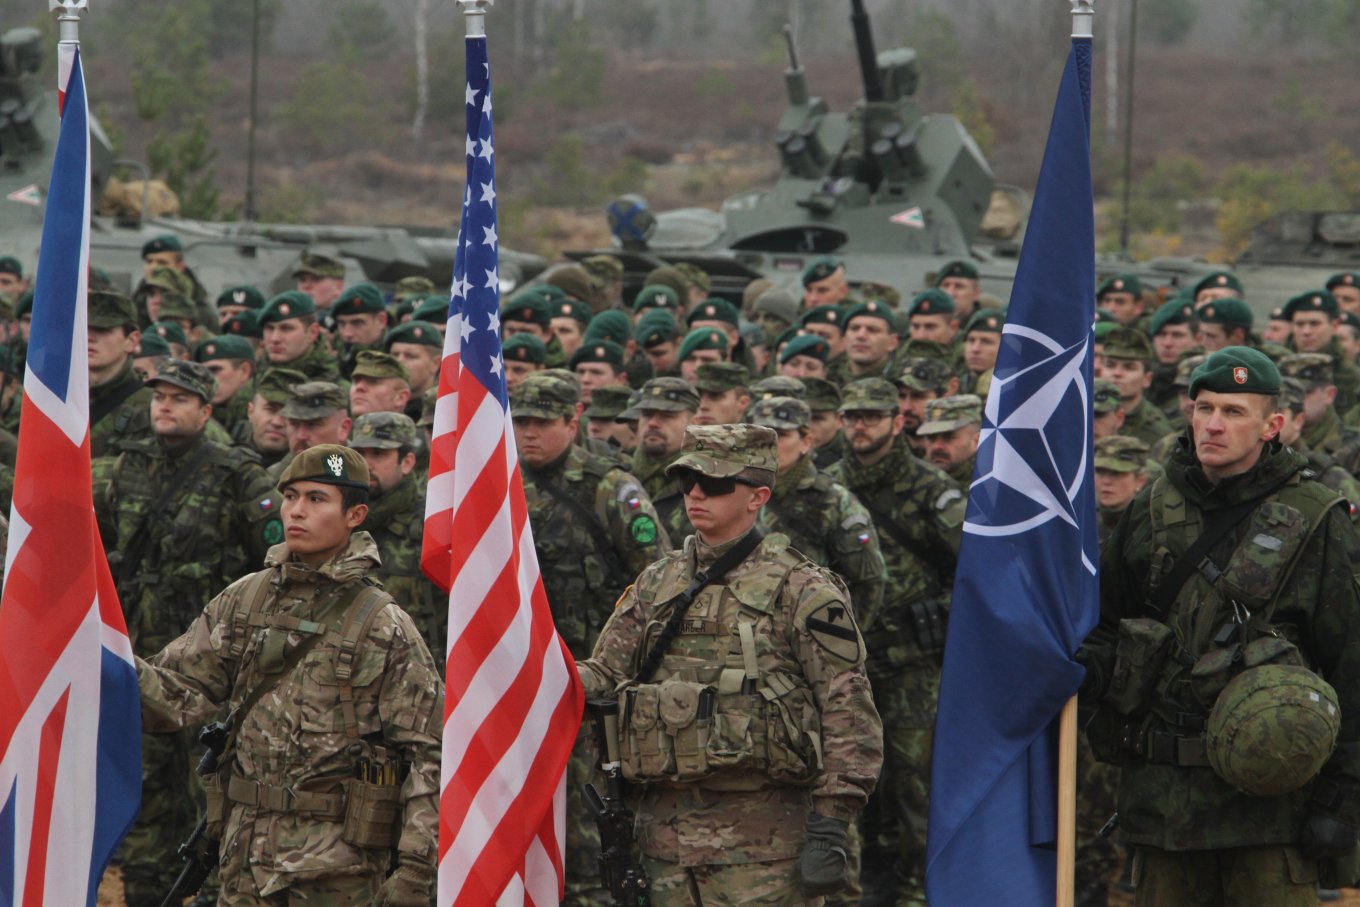 NATO drills / Defense Express / U.S. Dismantles its Status as Global Security Guardian: Why Josep Borrell's Speech is Important and What's Coming Next